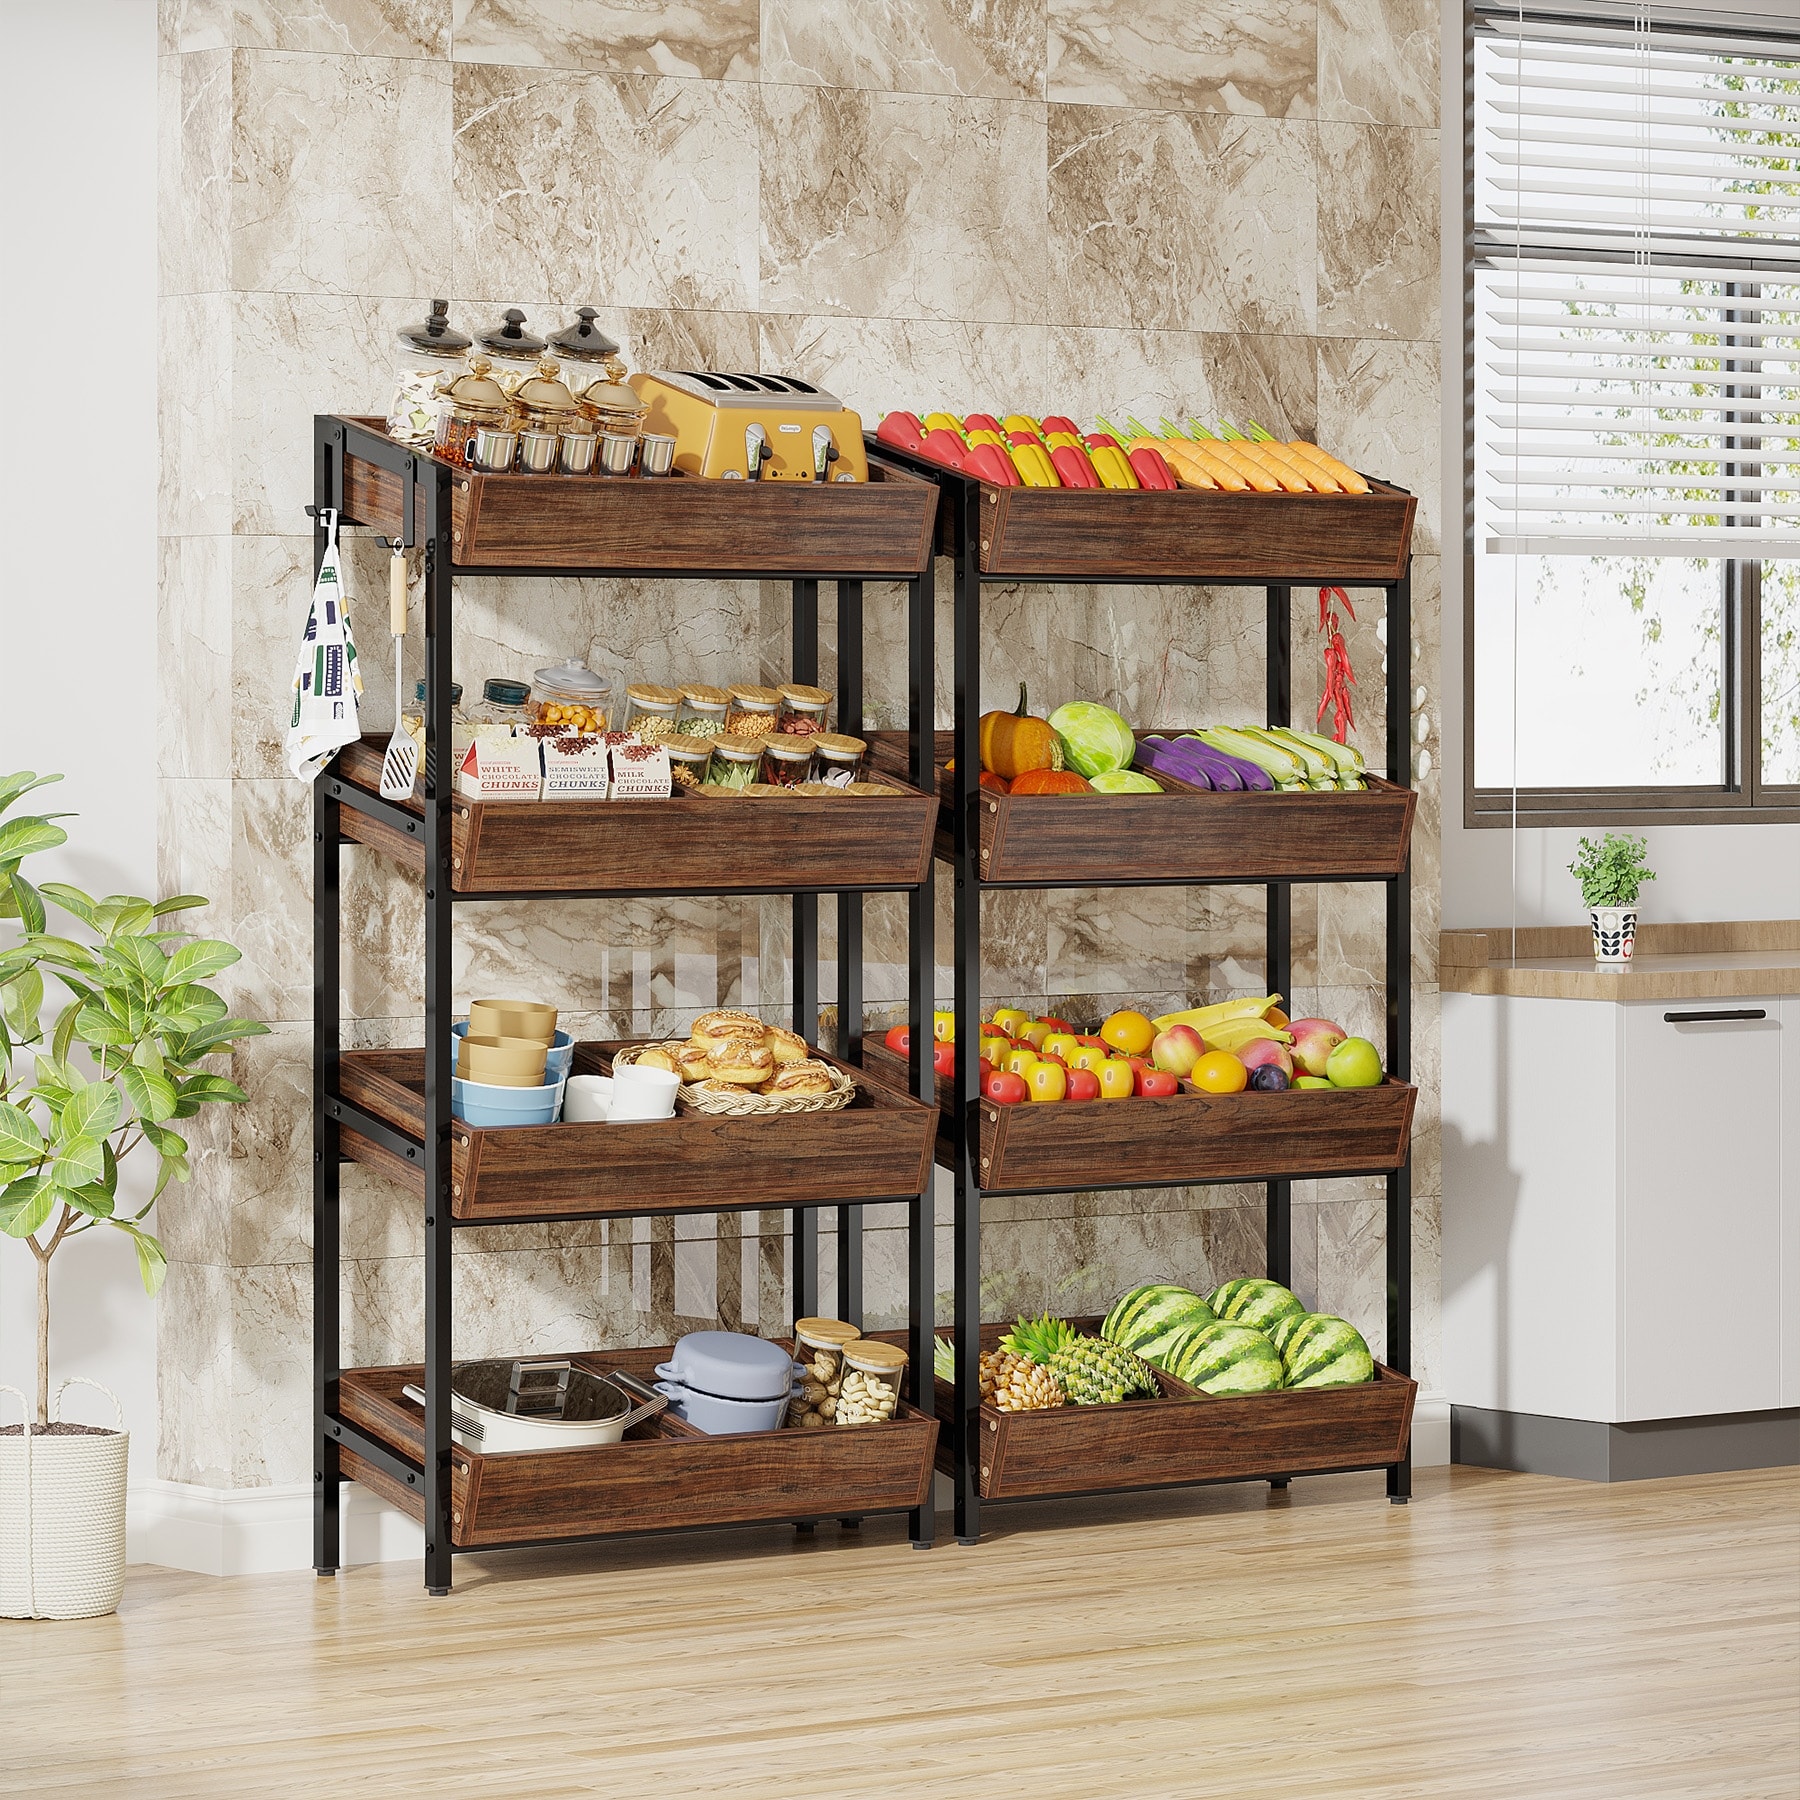 https://ak1.ostkcdn.com/images/products/is/images/direct/8749f75d1a0f6443564da6b01cf47900af358a6f/Industrial-4-Tier-Vegetable-and-Fruit-Storage-Rack-Stand%2CPotato-and-Onion-Bin-with-Storage%2CWood-Shelf-Unit-Snack-Stand.jpg